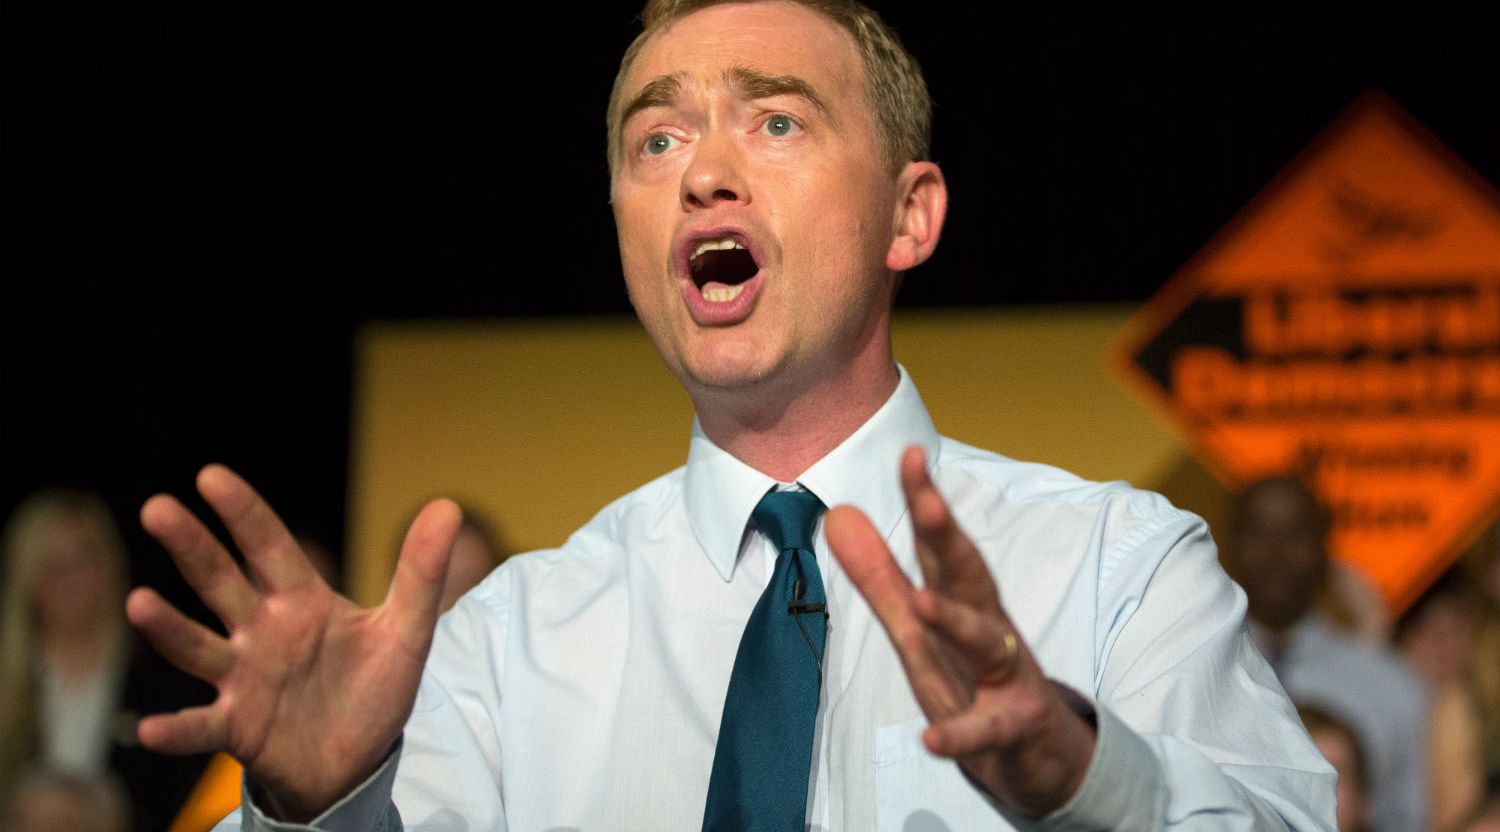 Tim Farron' compares gay people to frogs on Twitter | PinkNews